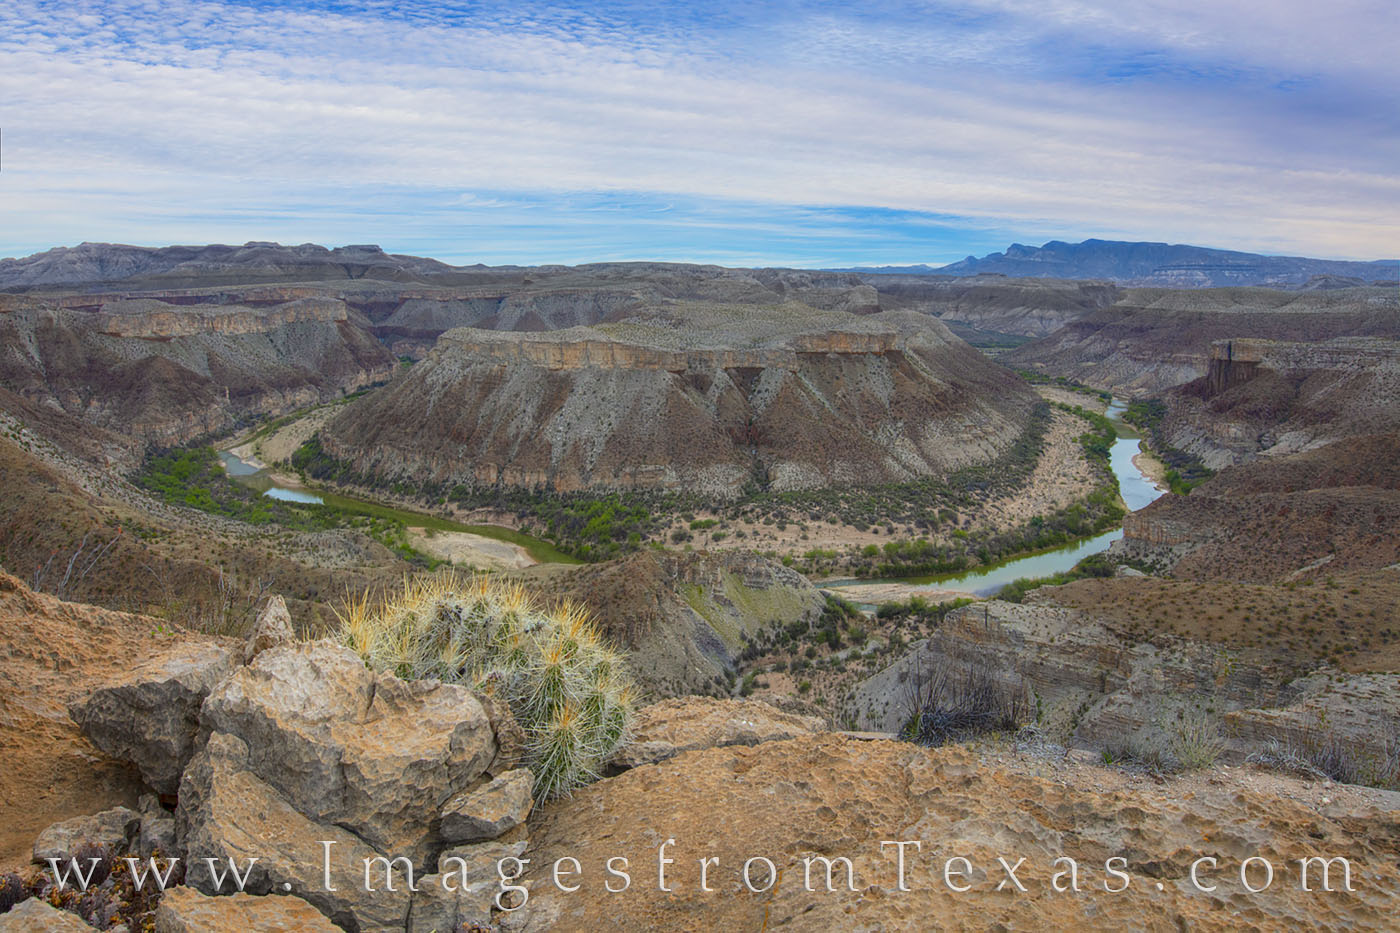 From high atop the Mesa de Anguila in the remote southwest corner of Big Bend National Park, this view shows the Rio Grande as...